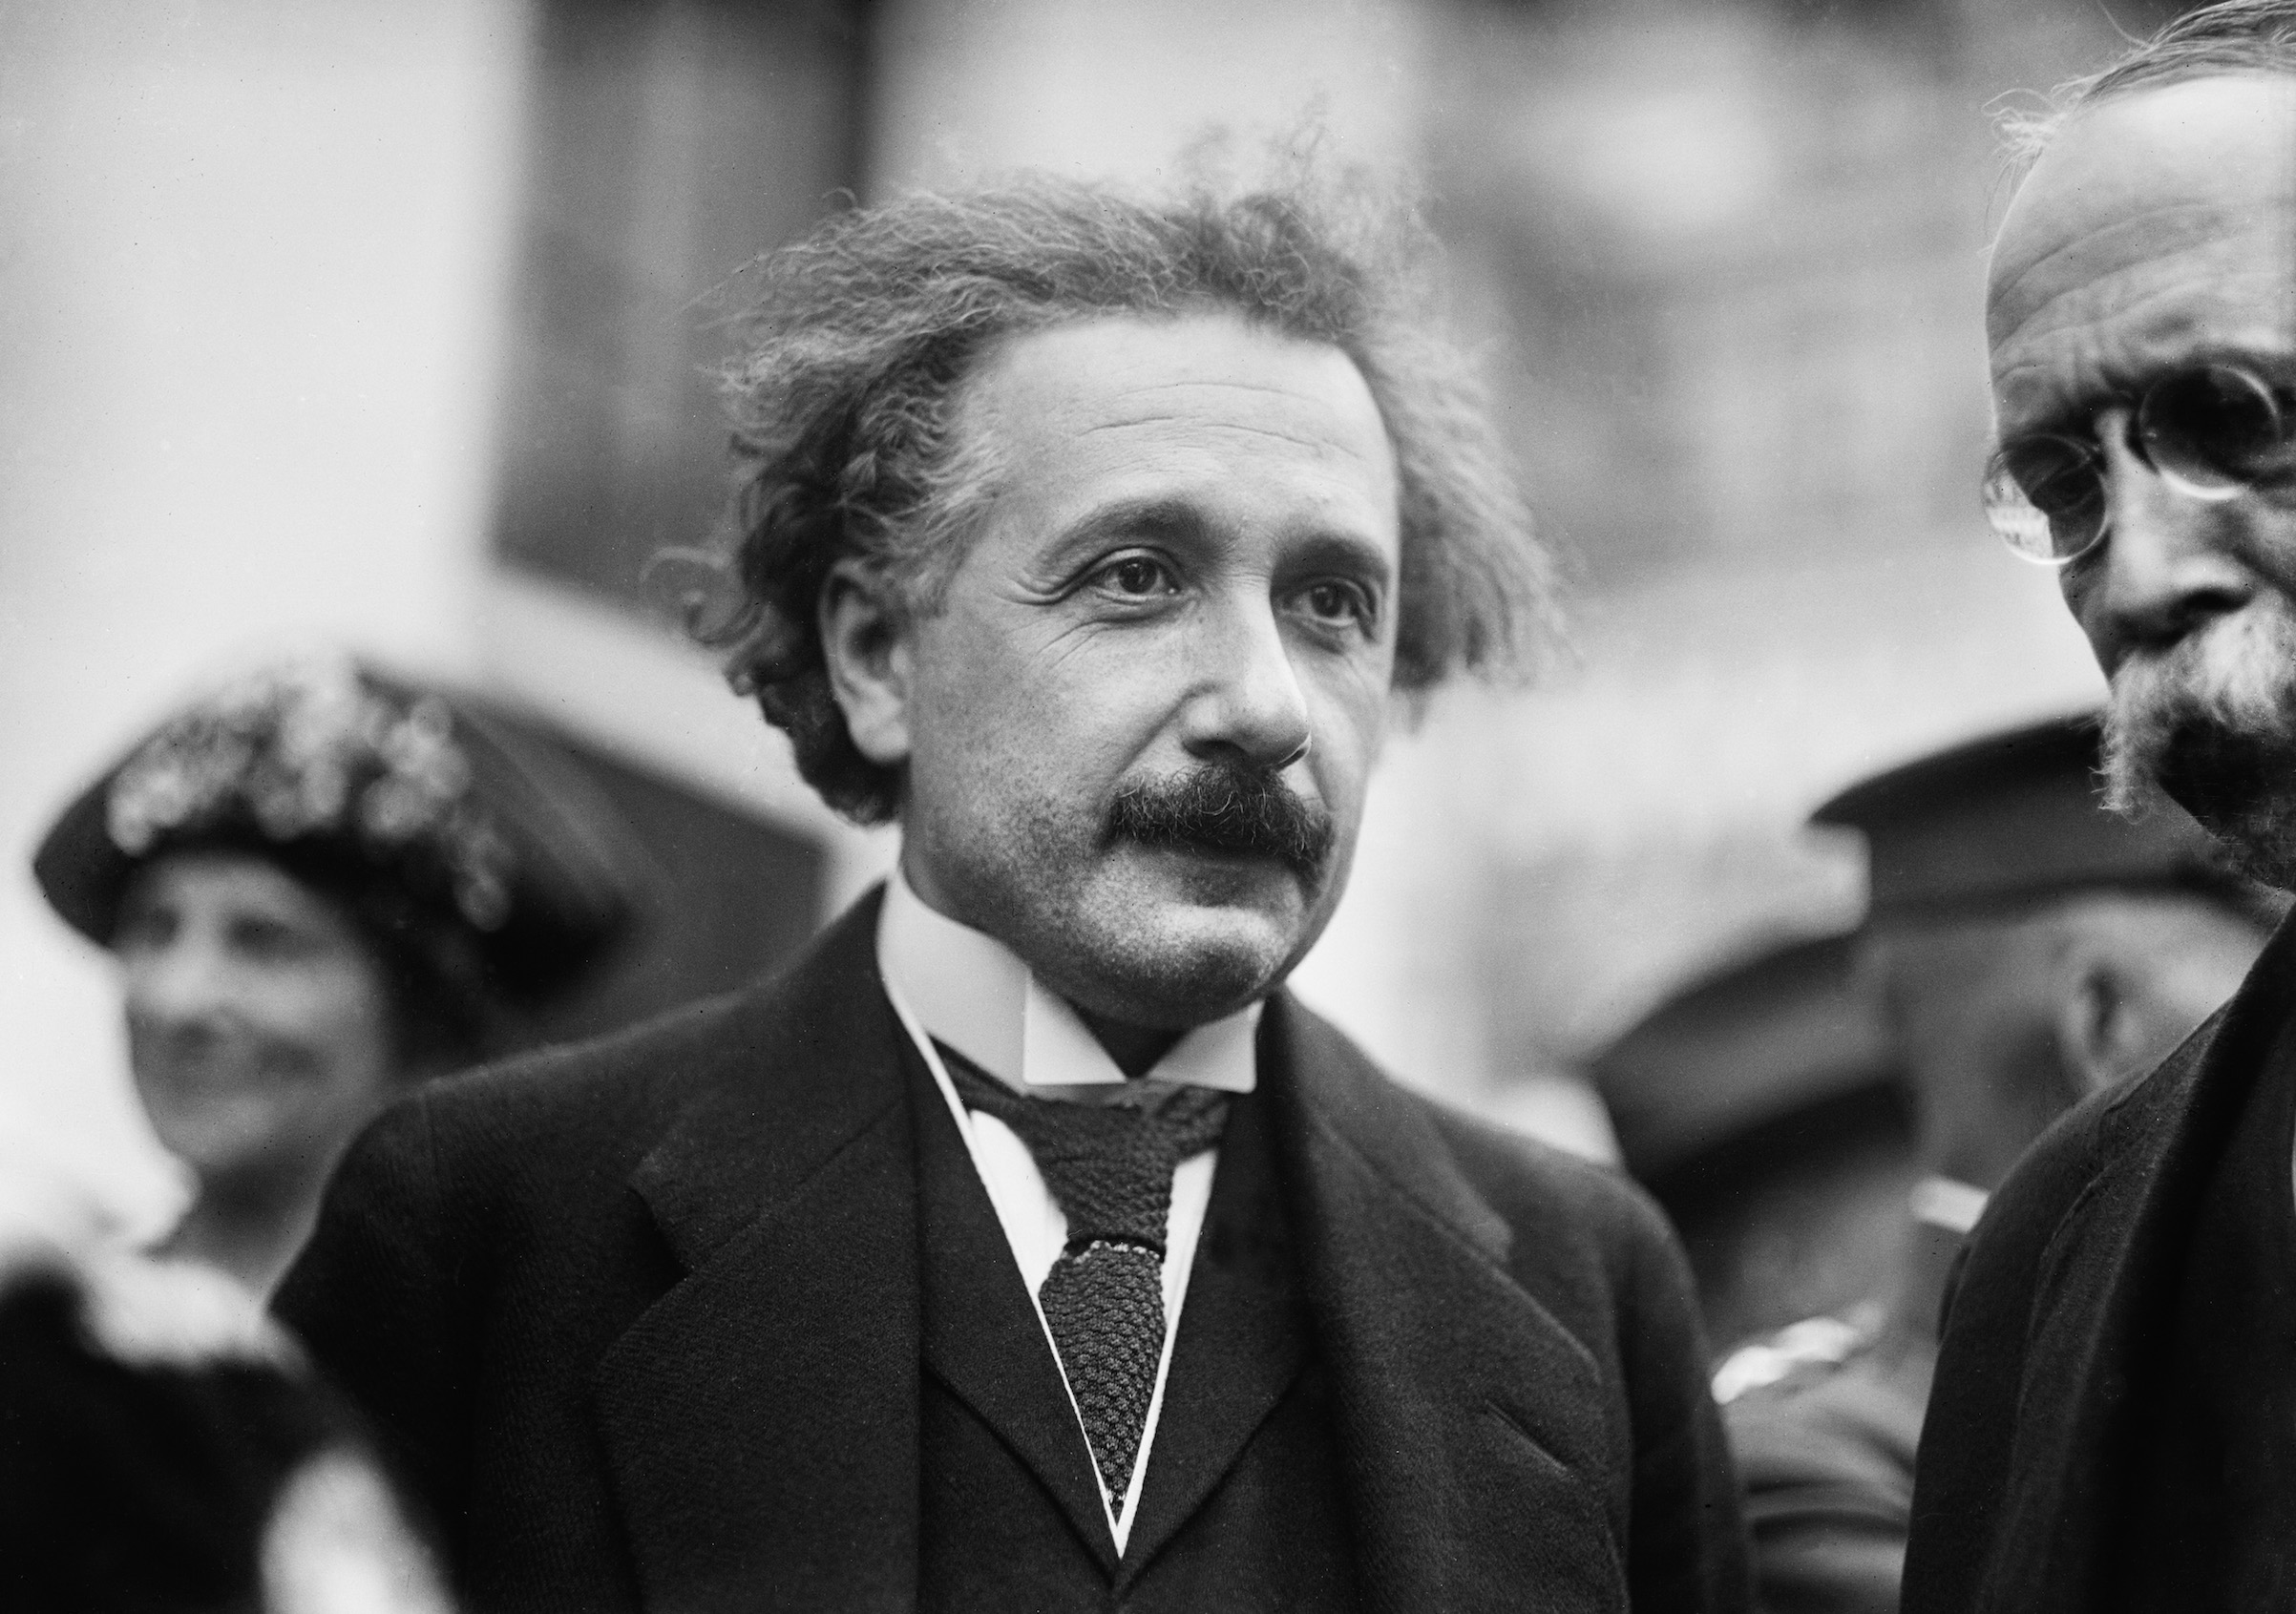 Albert Einstein, while visiting the White House in Washington, D.C., in the early 1920s. (Universal History Archive/Getty Images)